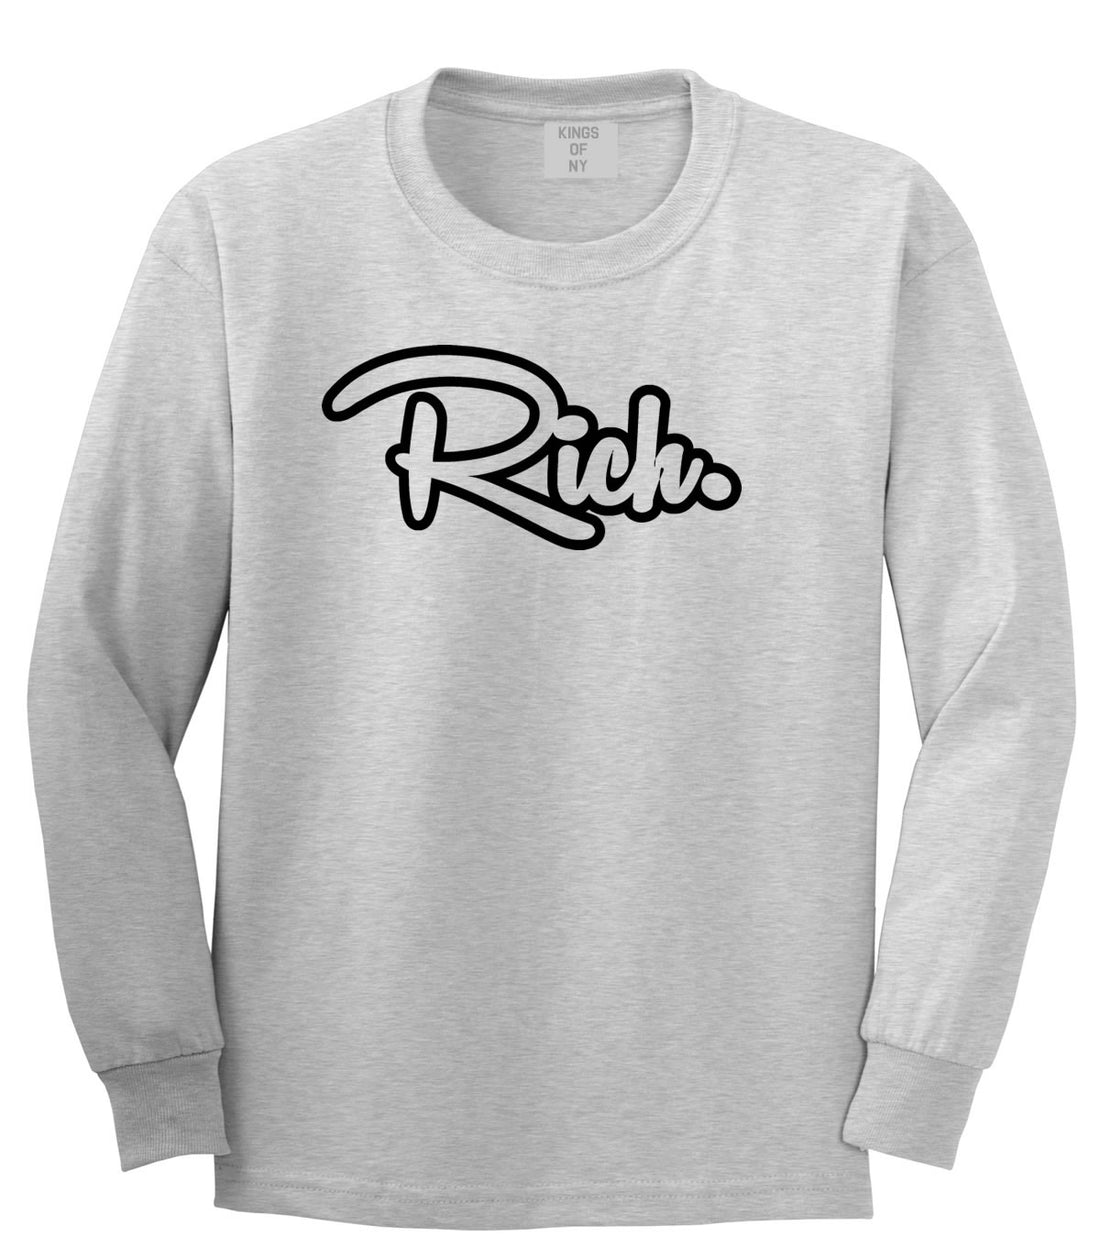 Rich Money Fab Style New York Richie NYC Long Sleeve T-Shirt In Grey by Kings Of NY